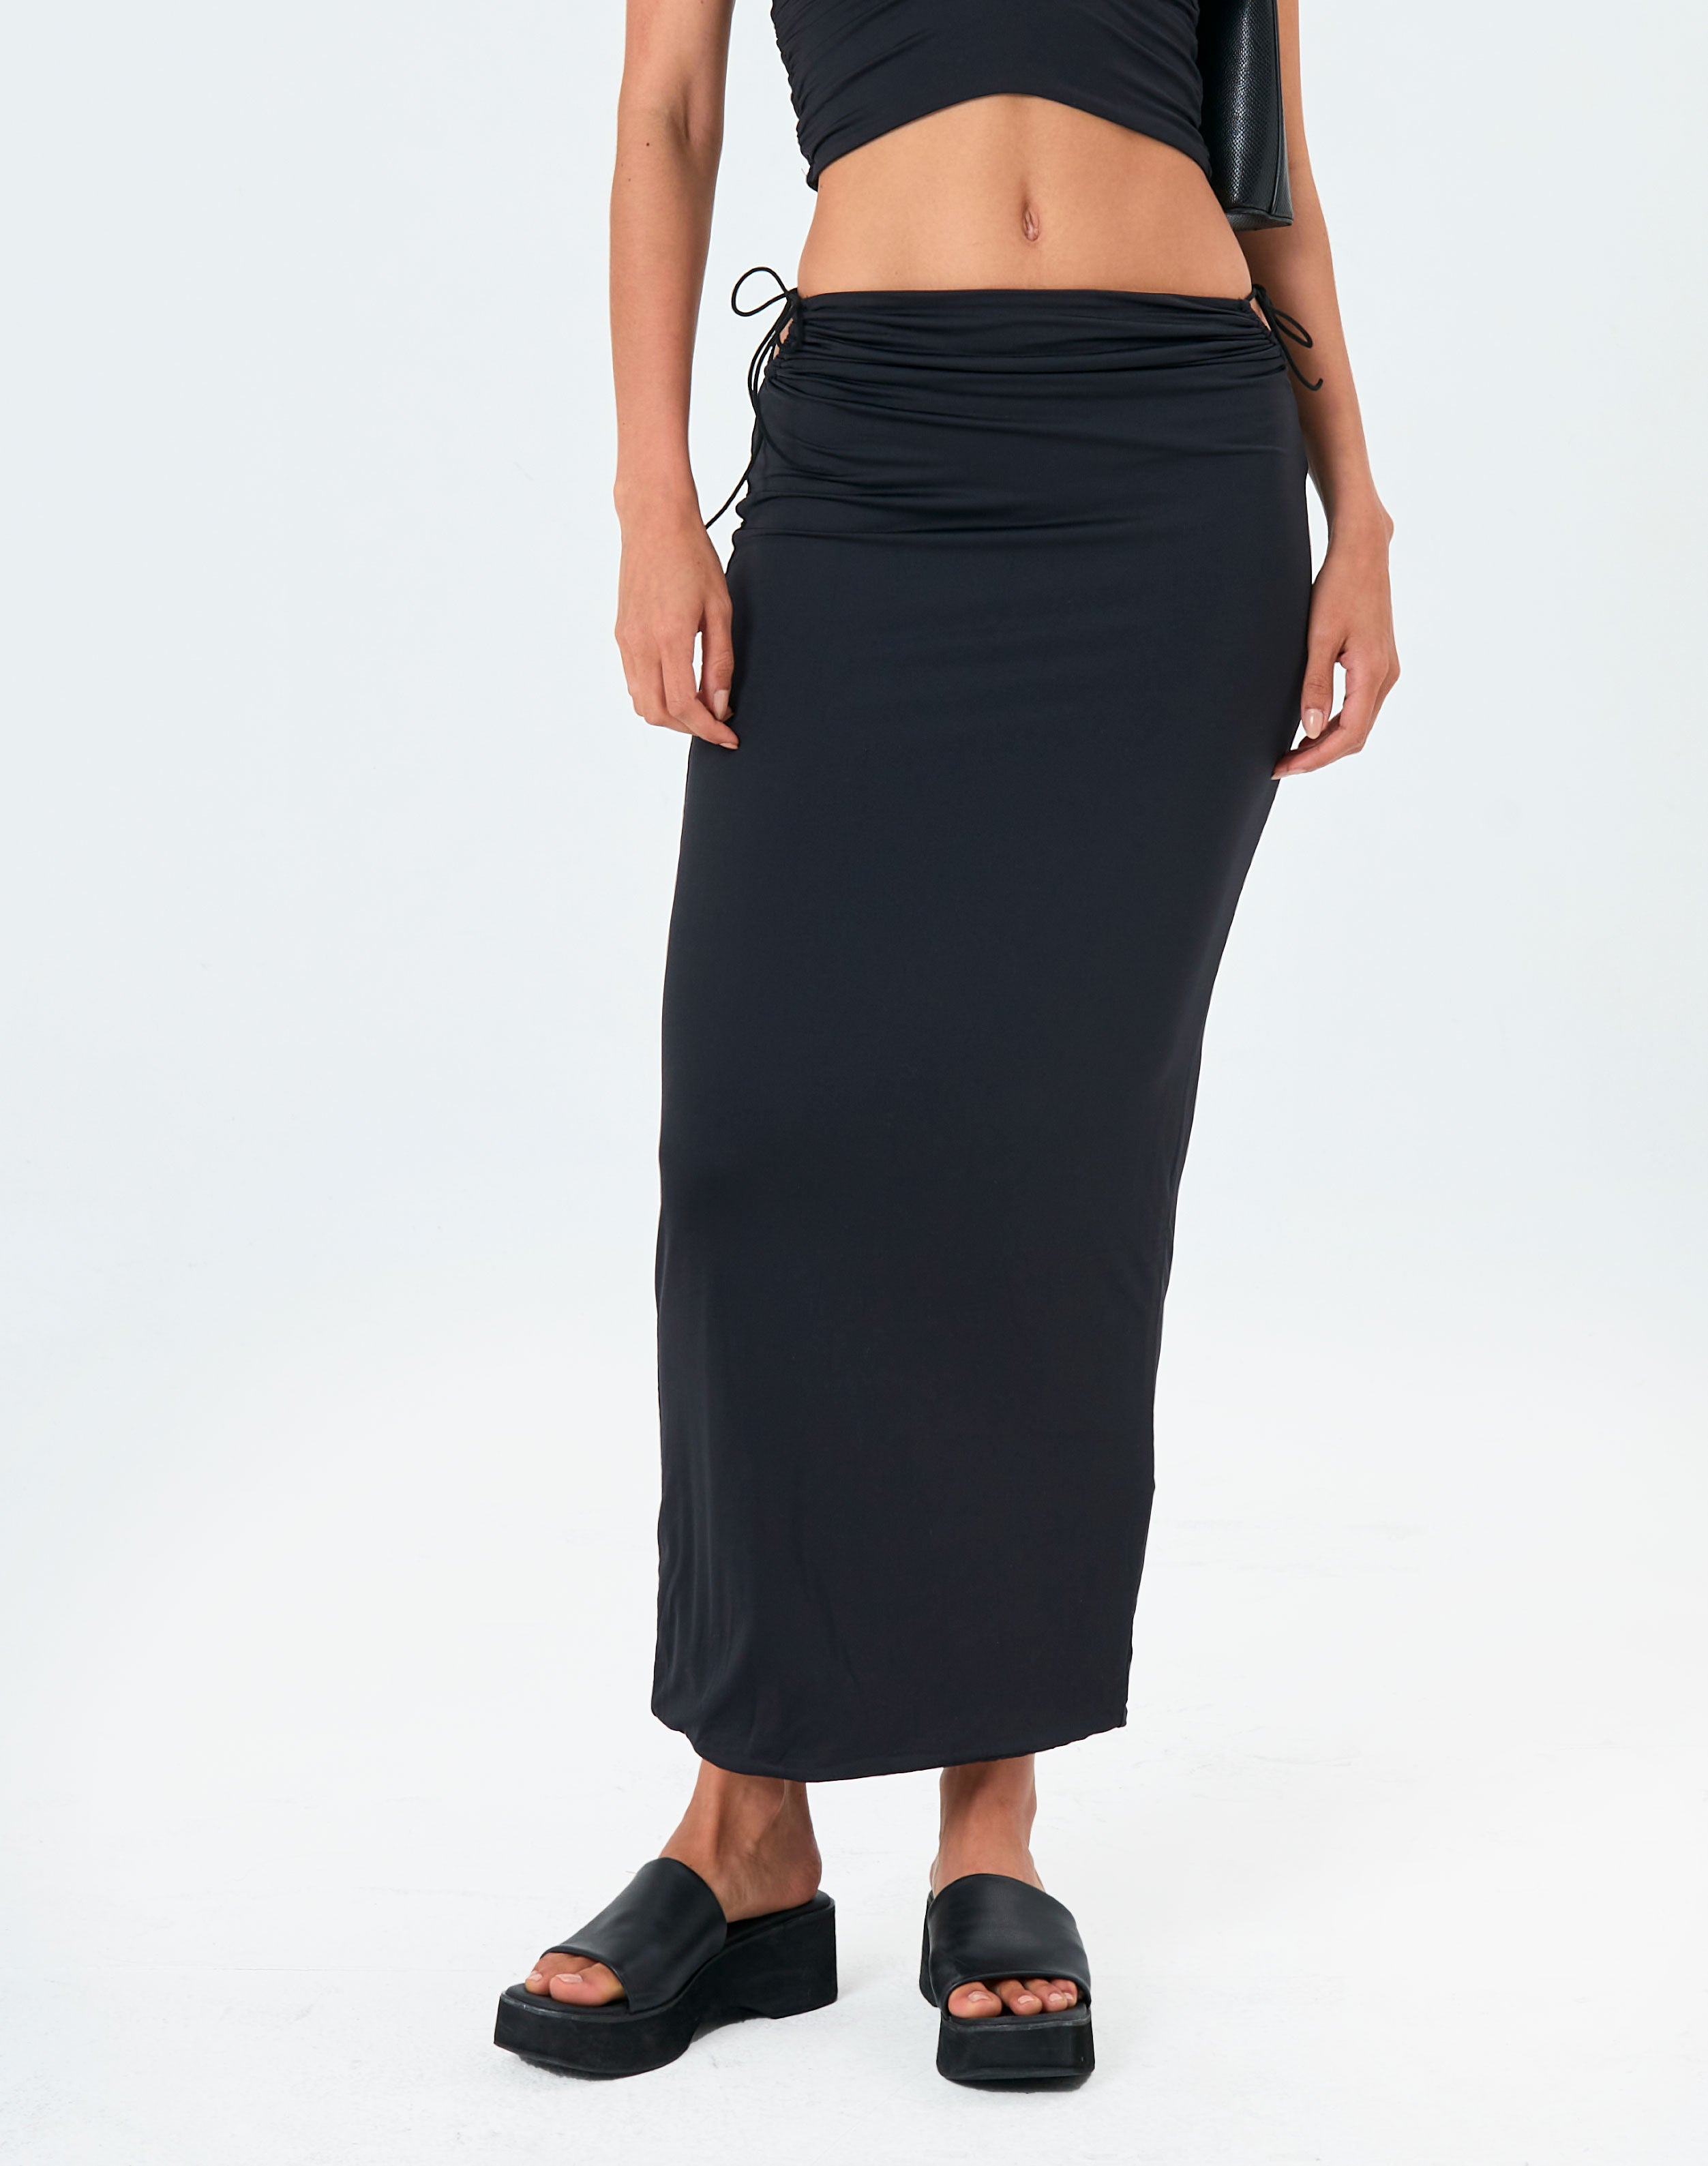 maxi skirt with slits on both sides